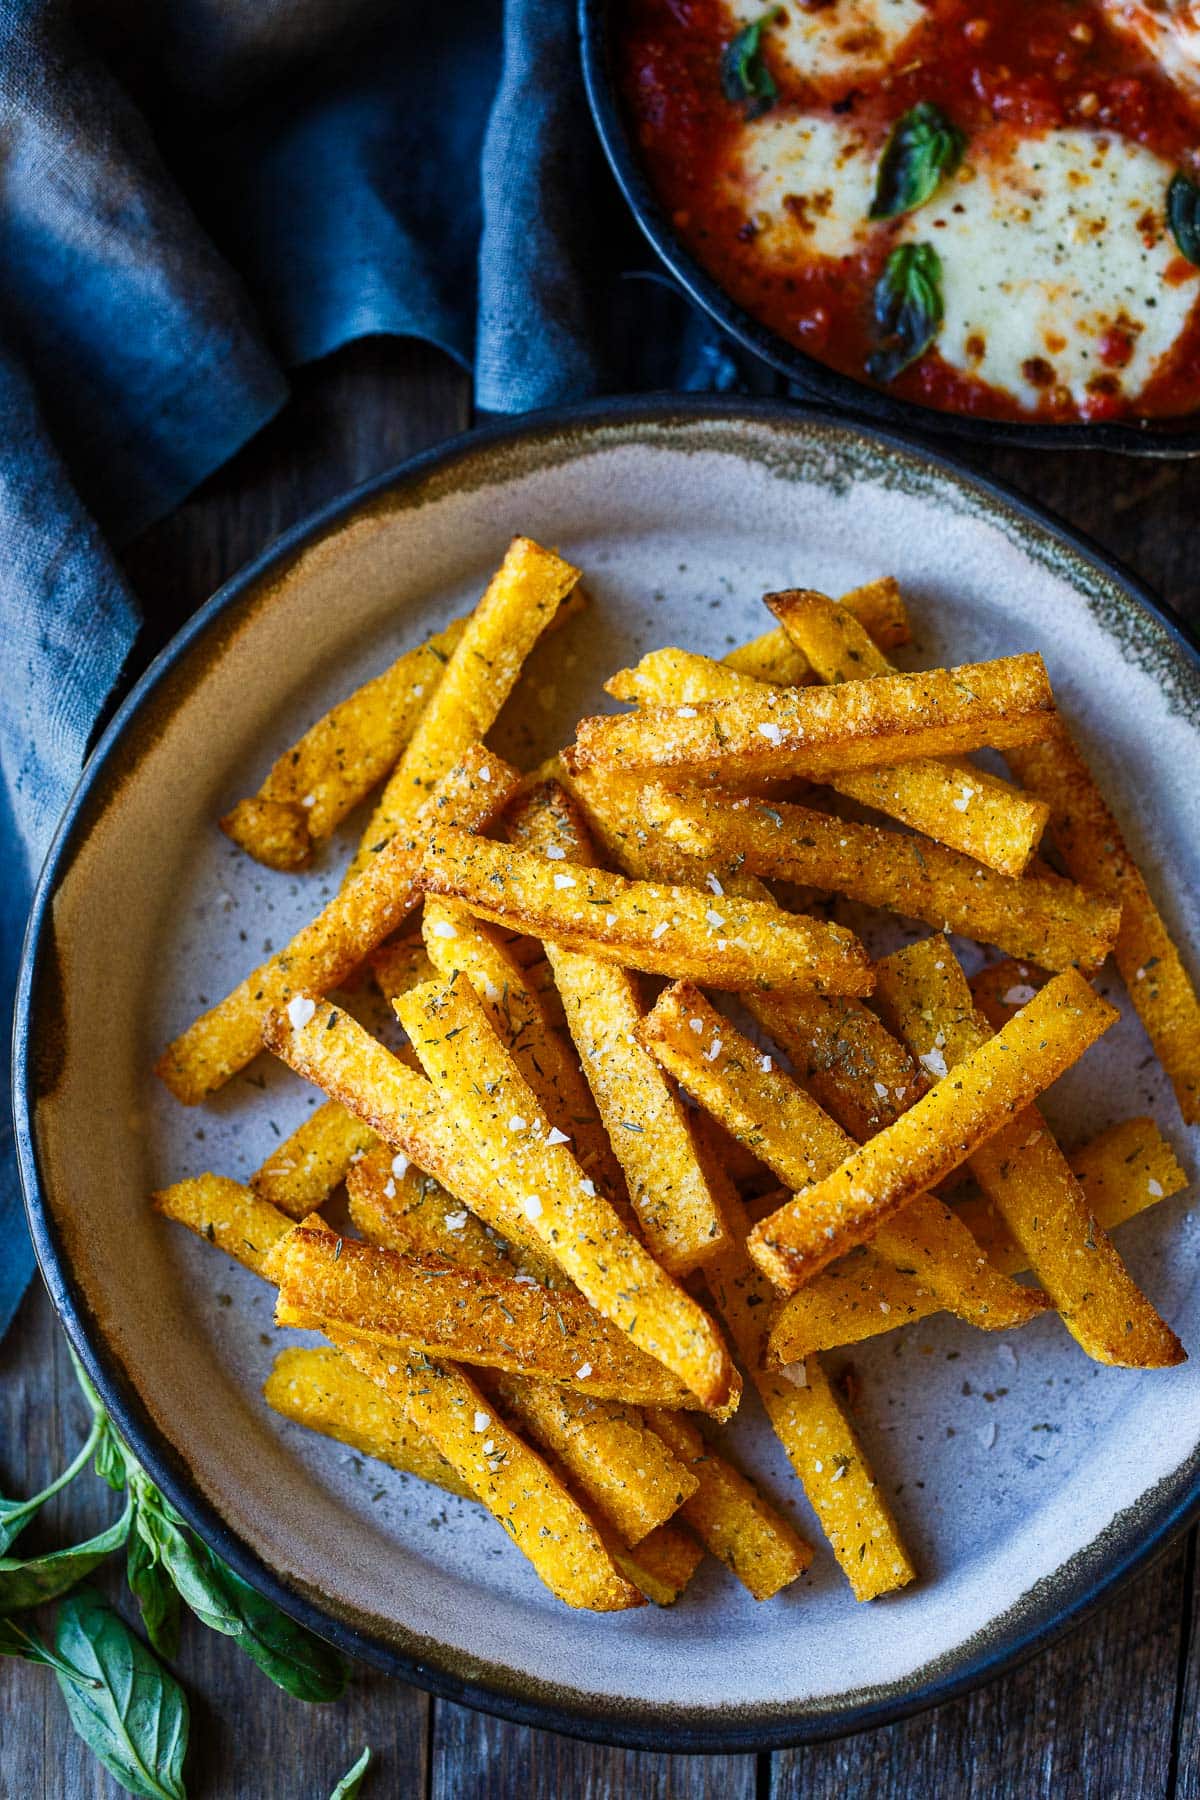 Crispy air fryer Polenta Fries! Whether you enjoy them as a snack, side dish, or appetizer, these polenta fries offer a delightful twist on a classic favorite. Give them a try and savor their crispy, tender goodness! Vegan and Gluten-free. (Directions for conventional oven included.)